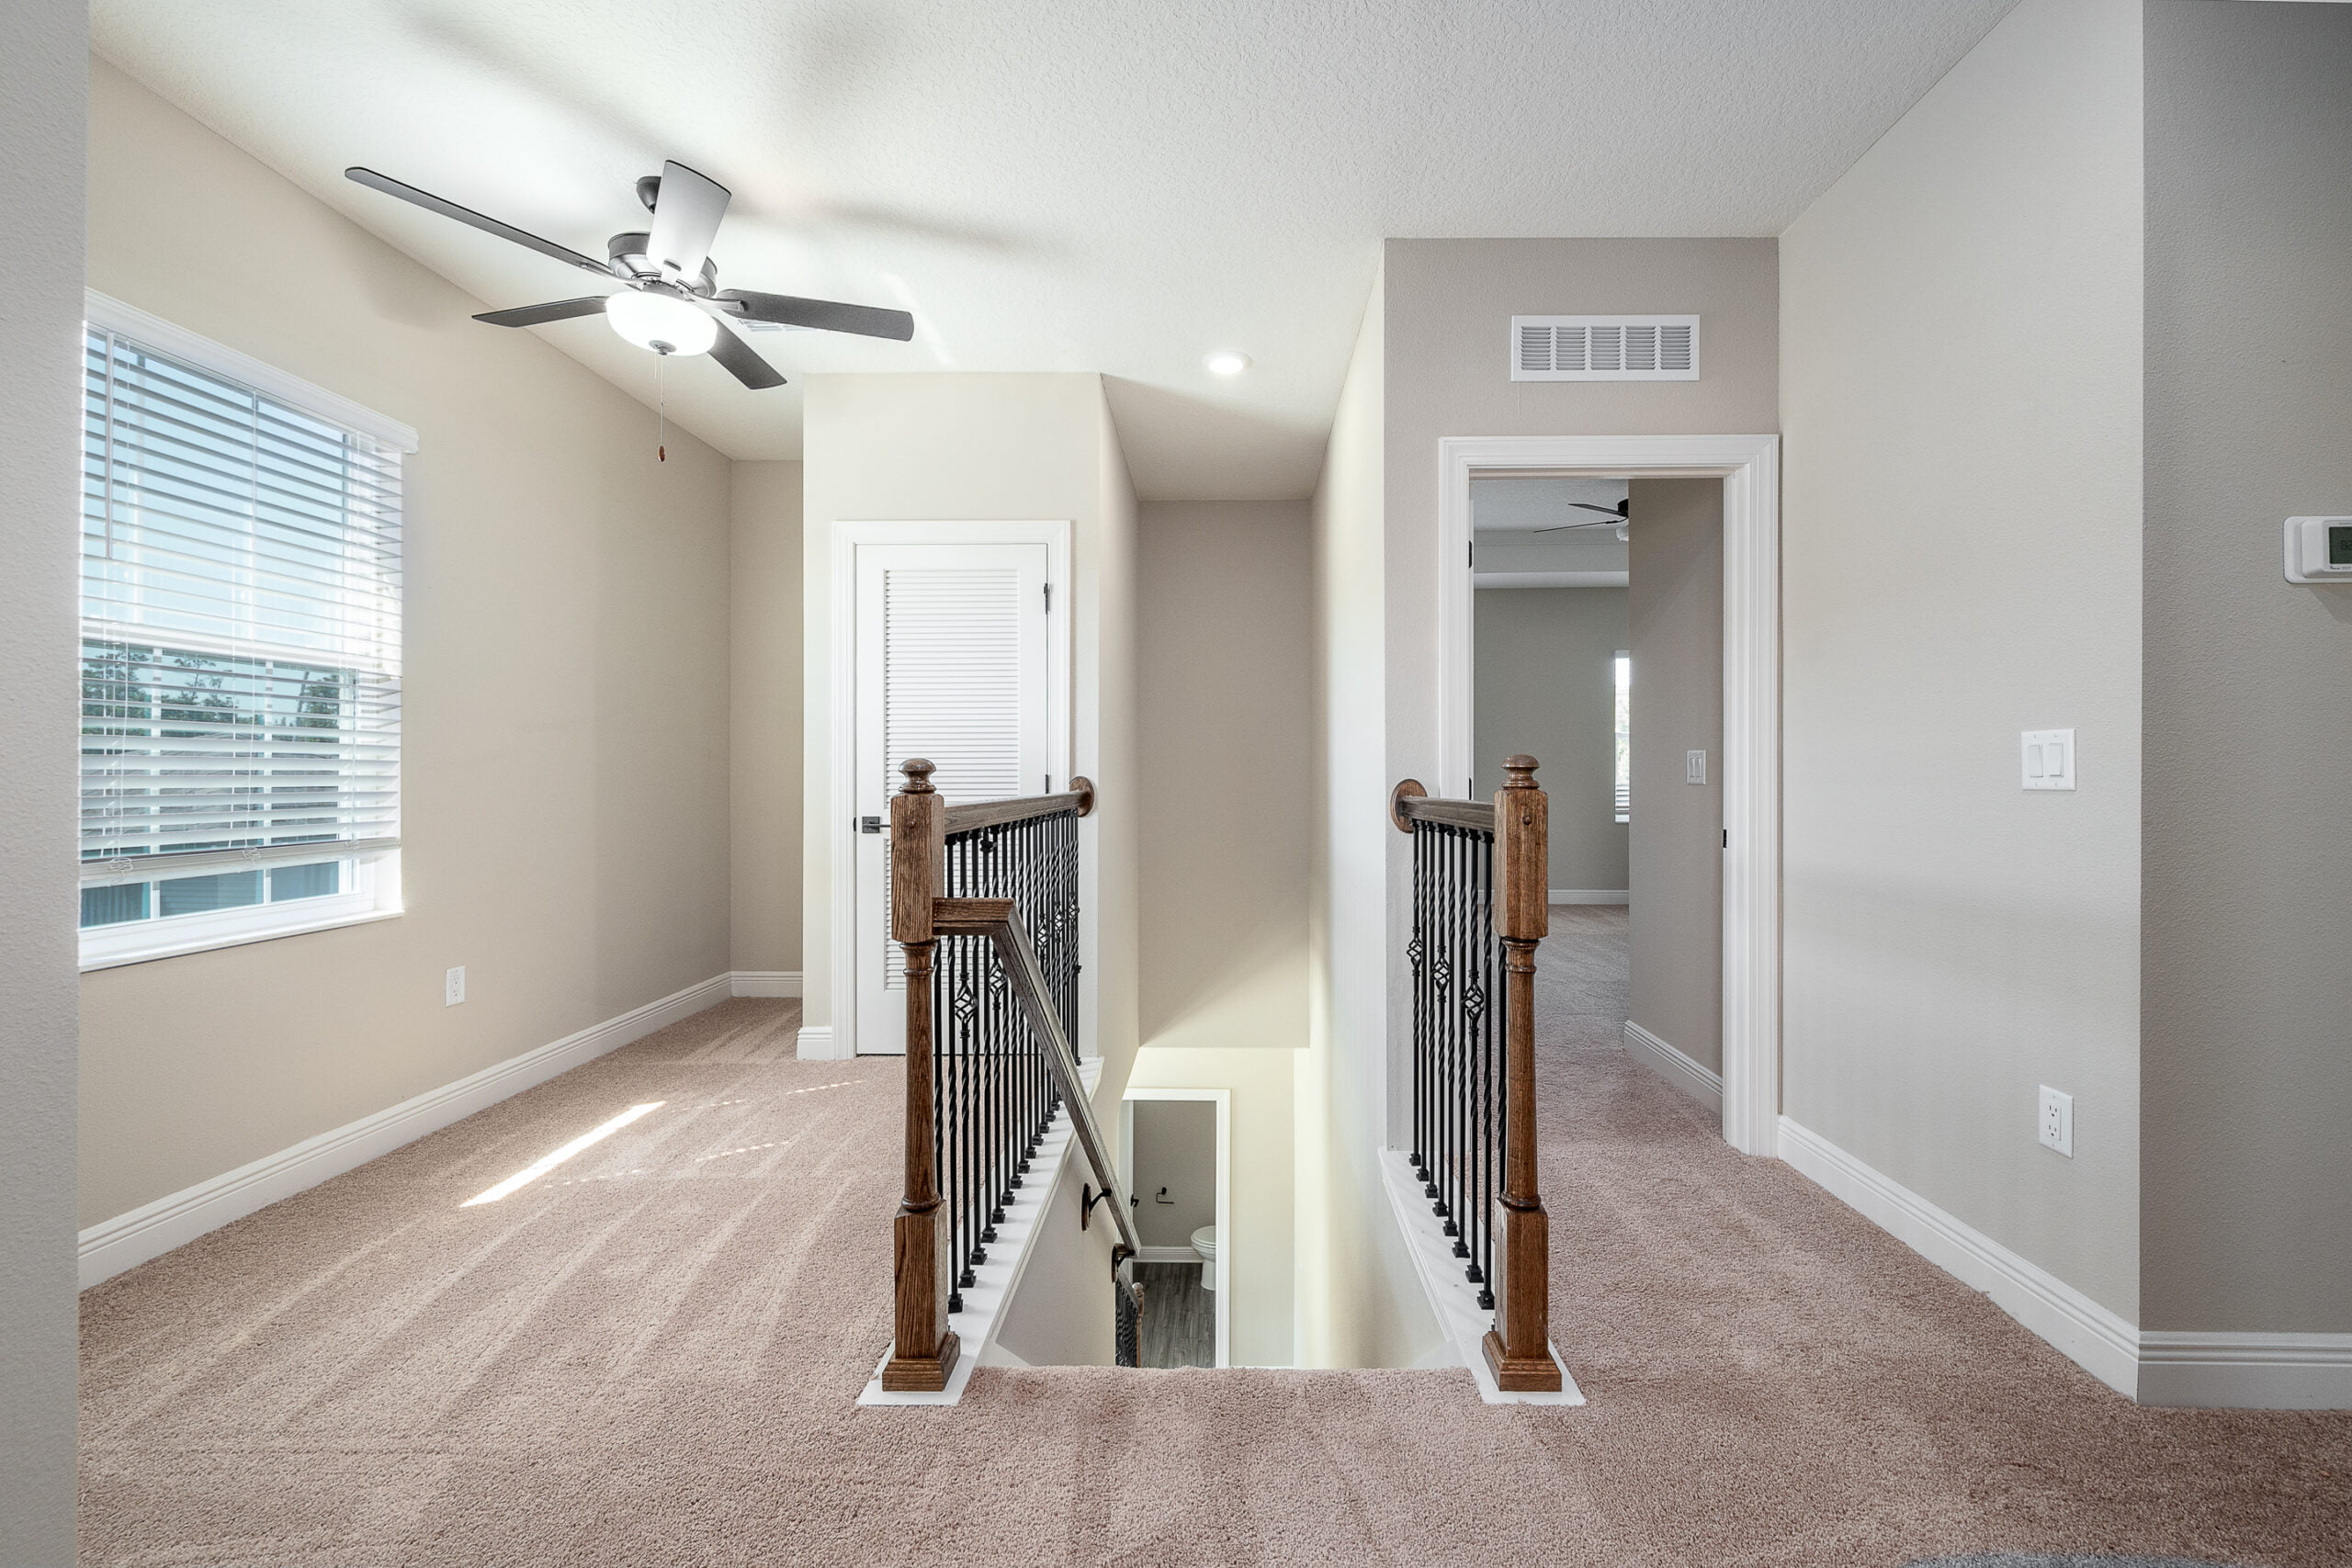 This photo shows a carpeted upstairs landing with a wooden and wrought iron railing. A ceiling fan hangs above, and there's a window to one side. The area has two white doors, one leading downstairs, and the other presumably to a room. Natural light brightens the space.